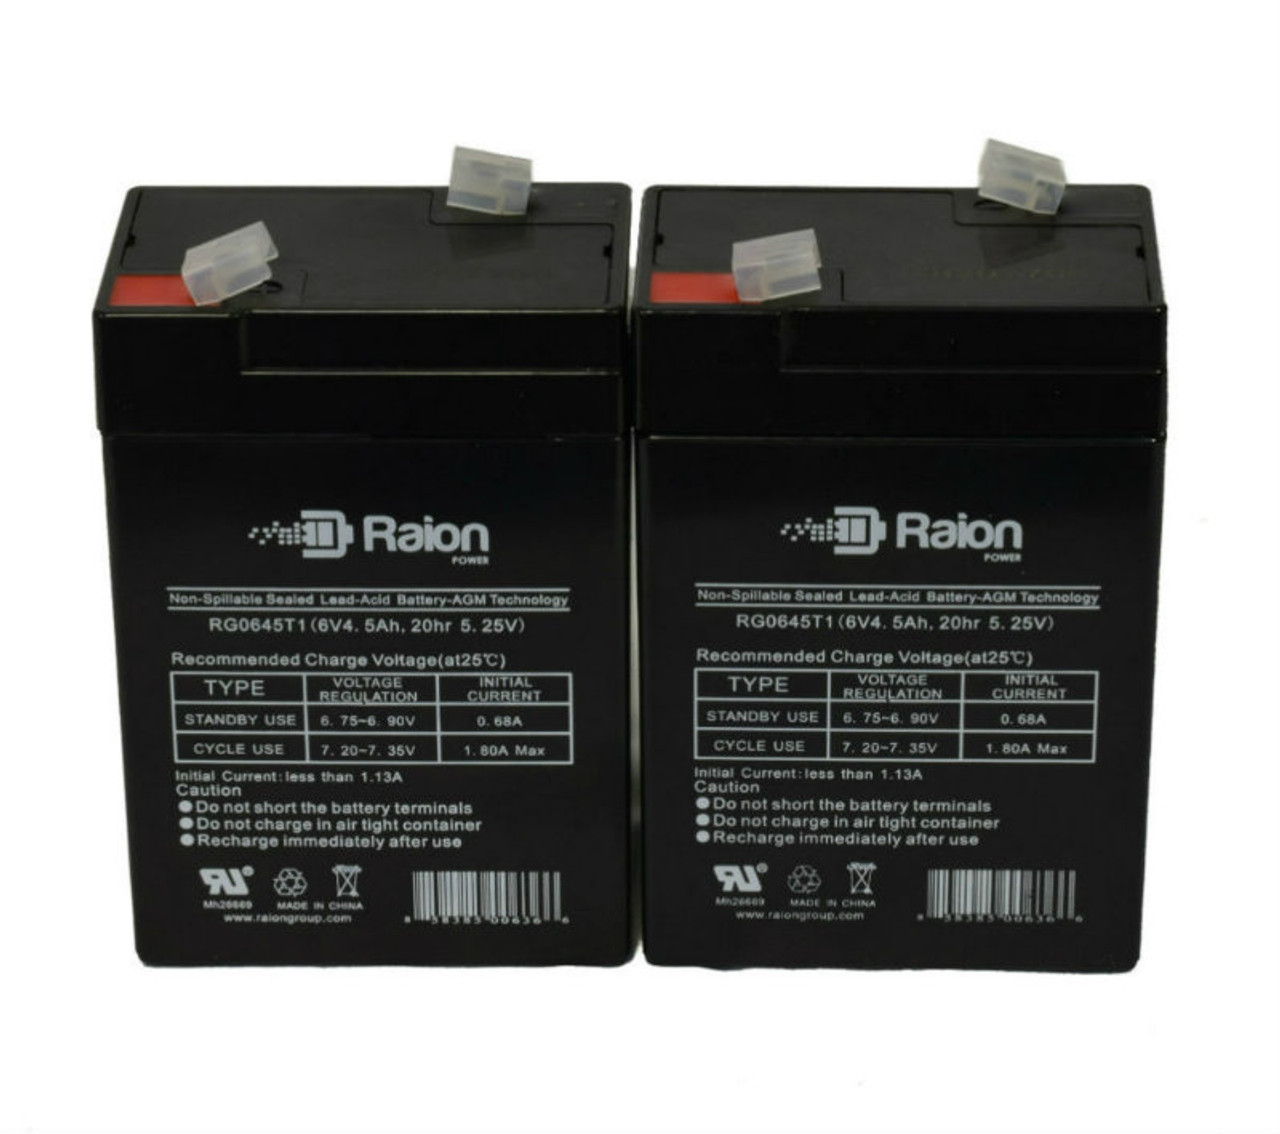 Raion Power 6V 4.5Ah Replacement Emergency Light Battery for Dual Lite 12-255 - 2 Pack